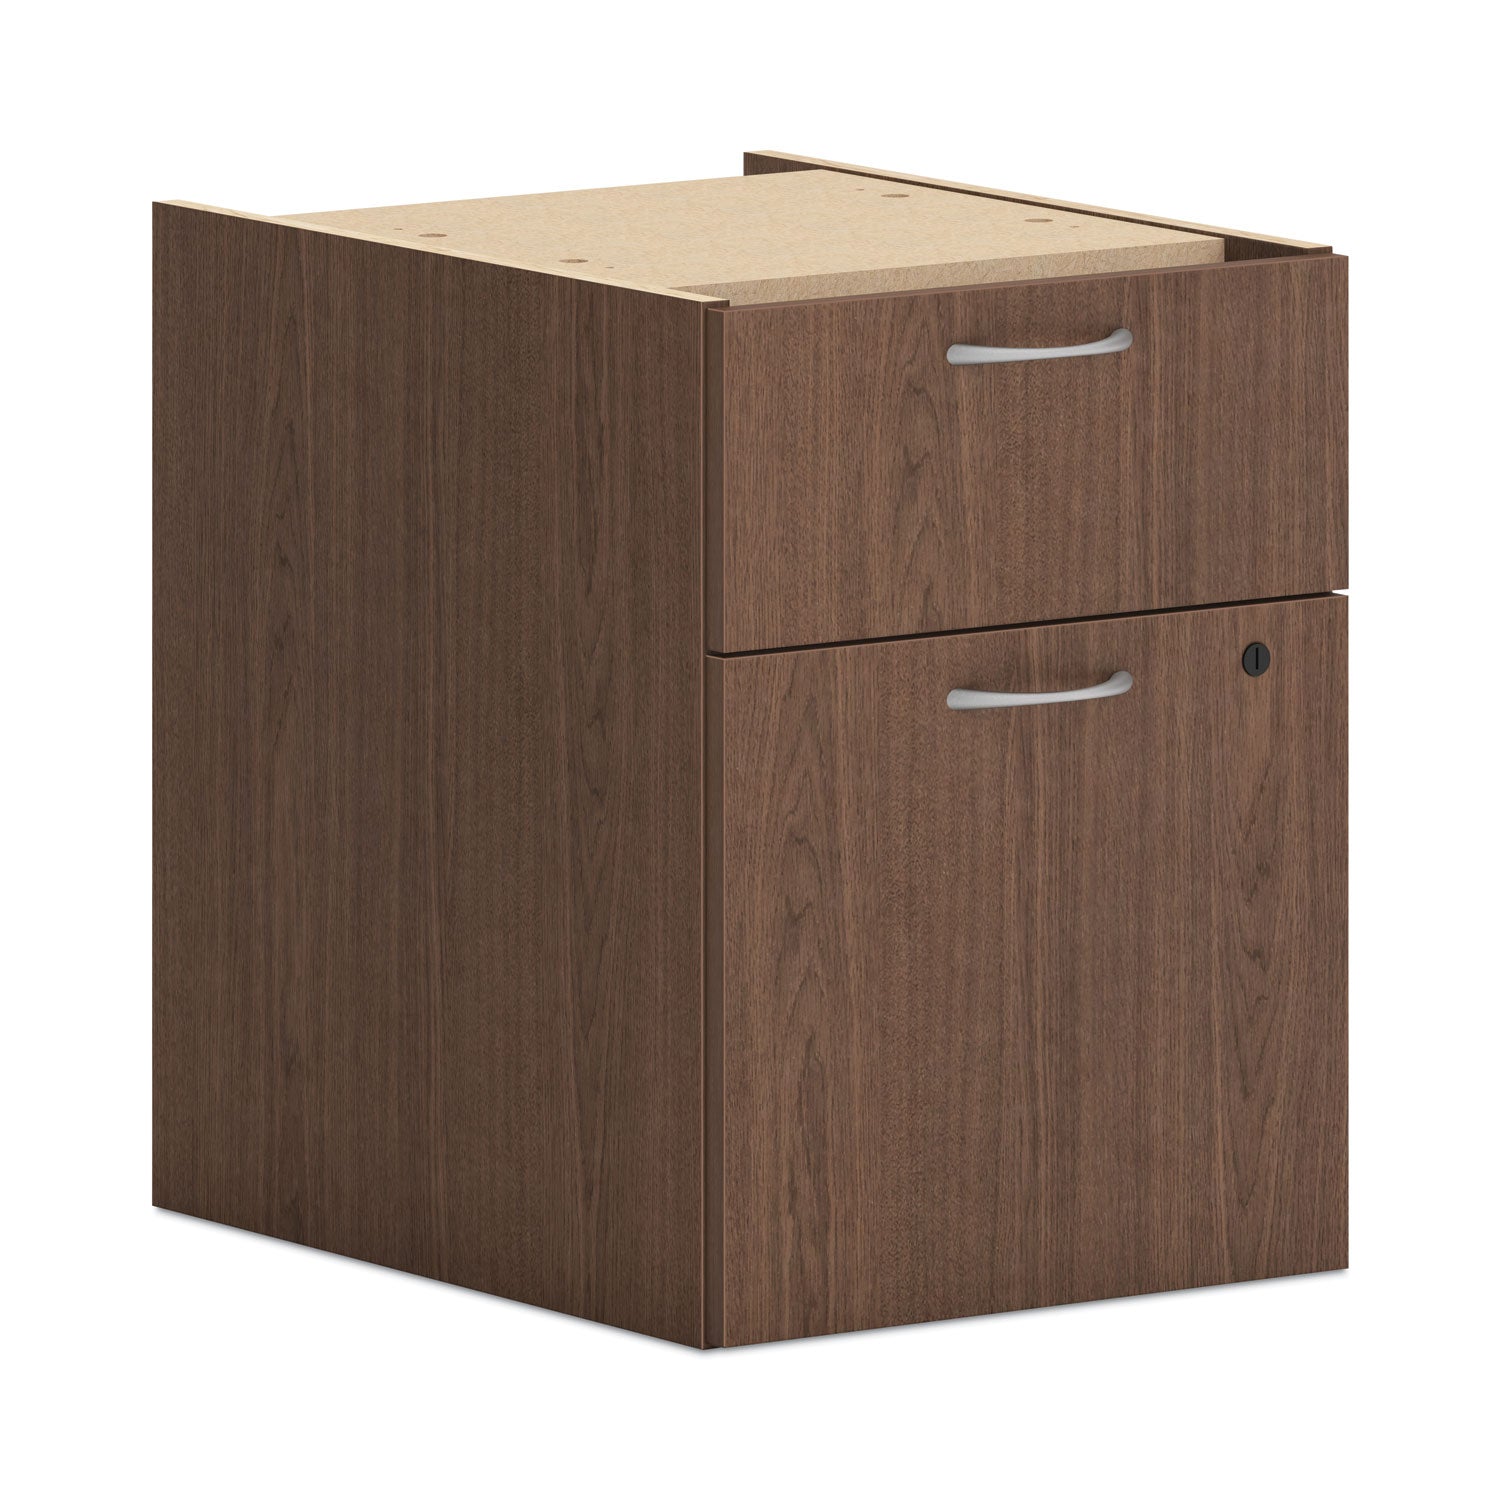 mod-support-pedestal-left-or-right-2-drawers-box-file-legal-letter-sepia-walnut-15-x-20-x-20_honplphbfle1 - 1